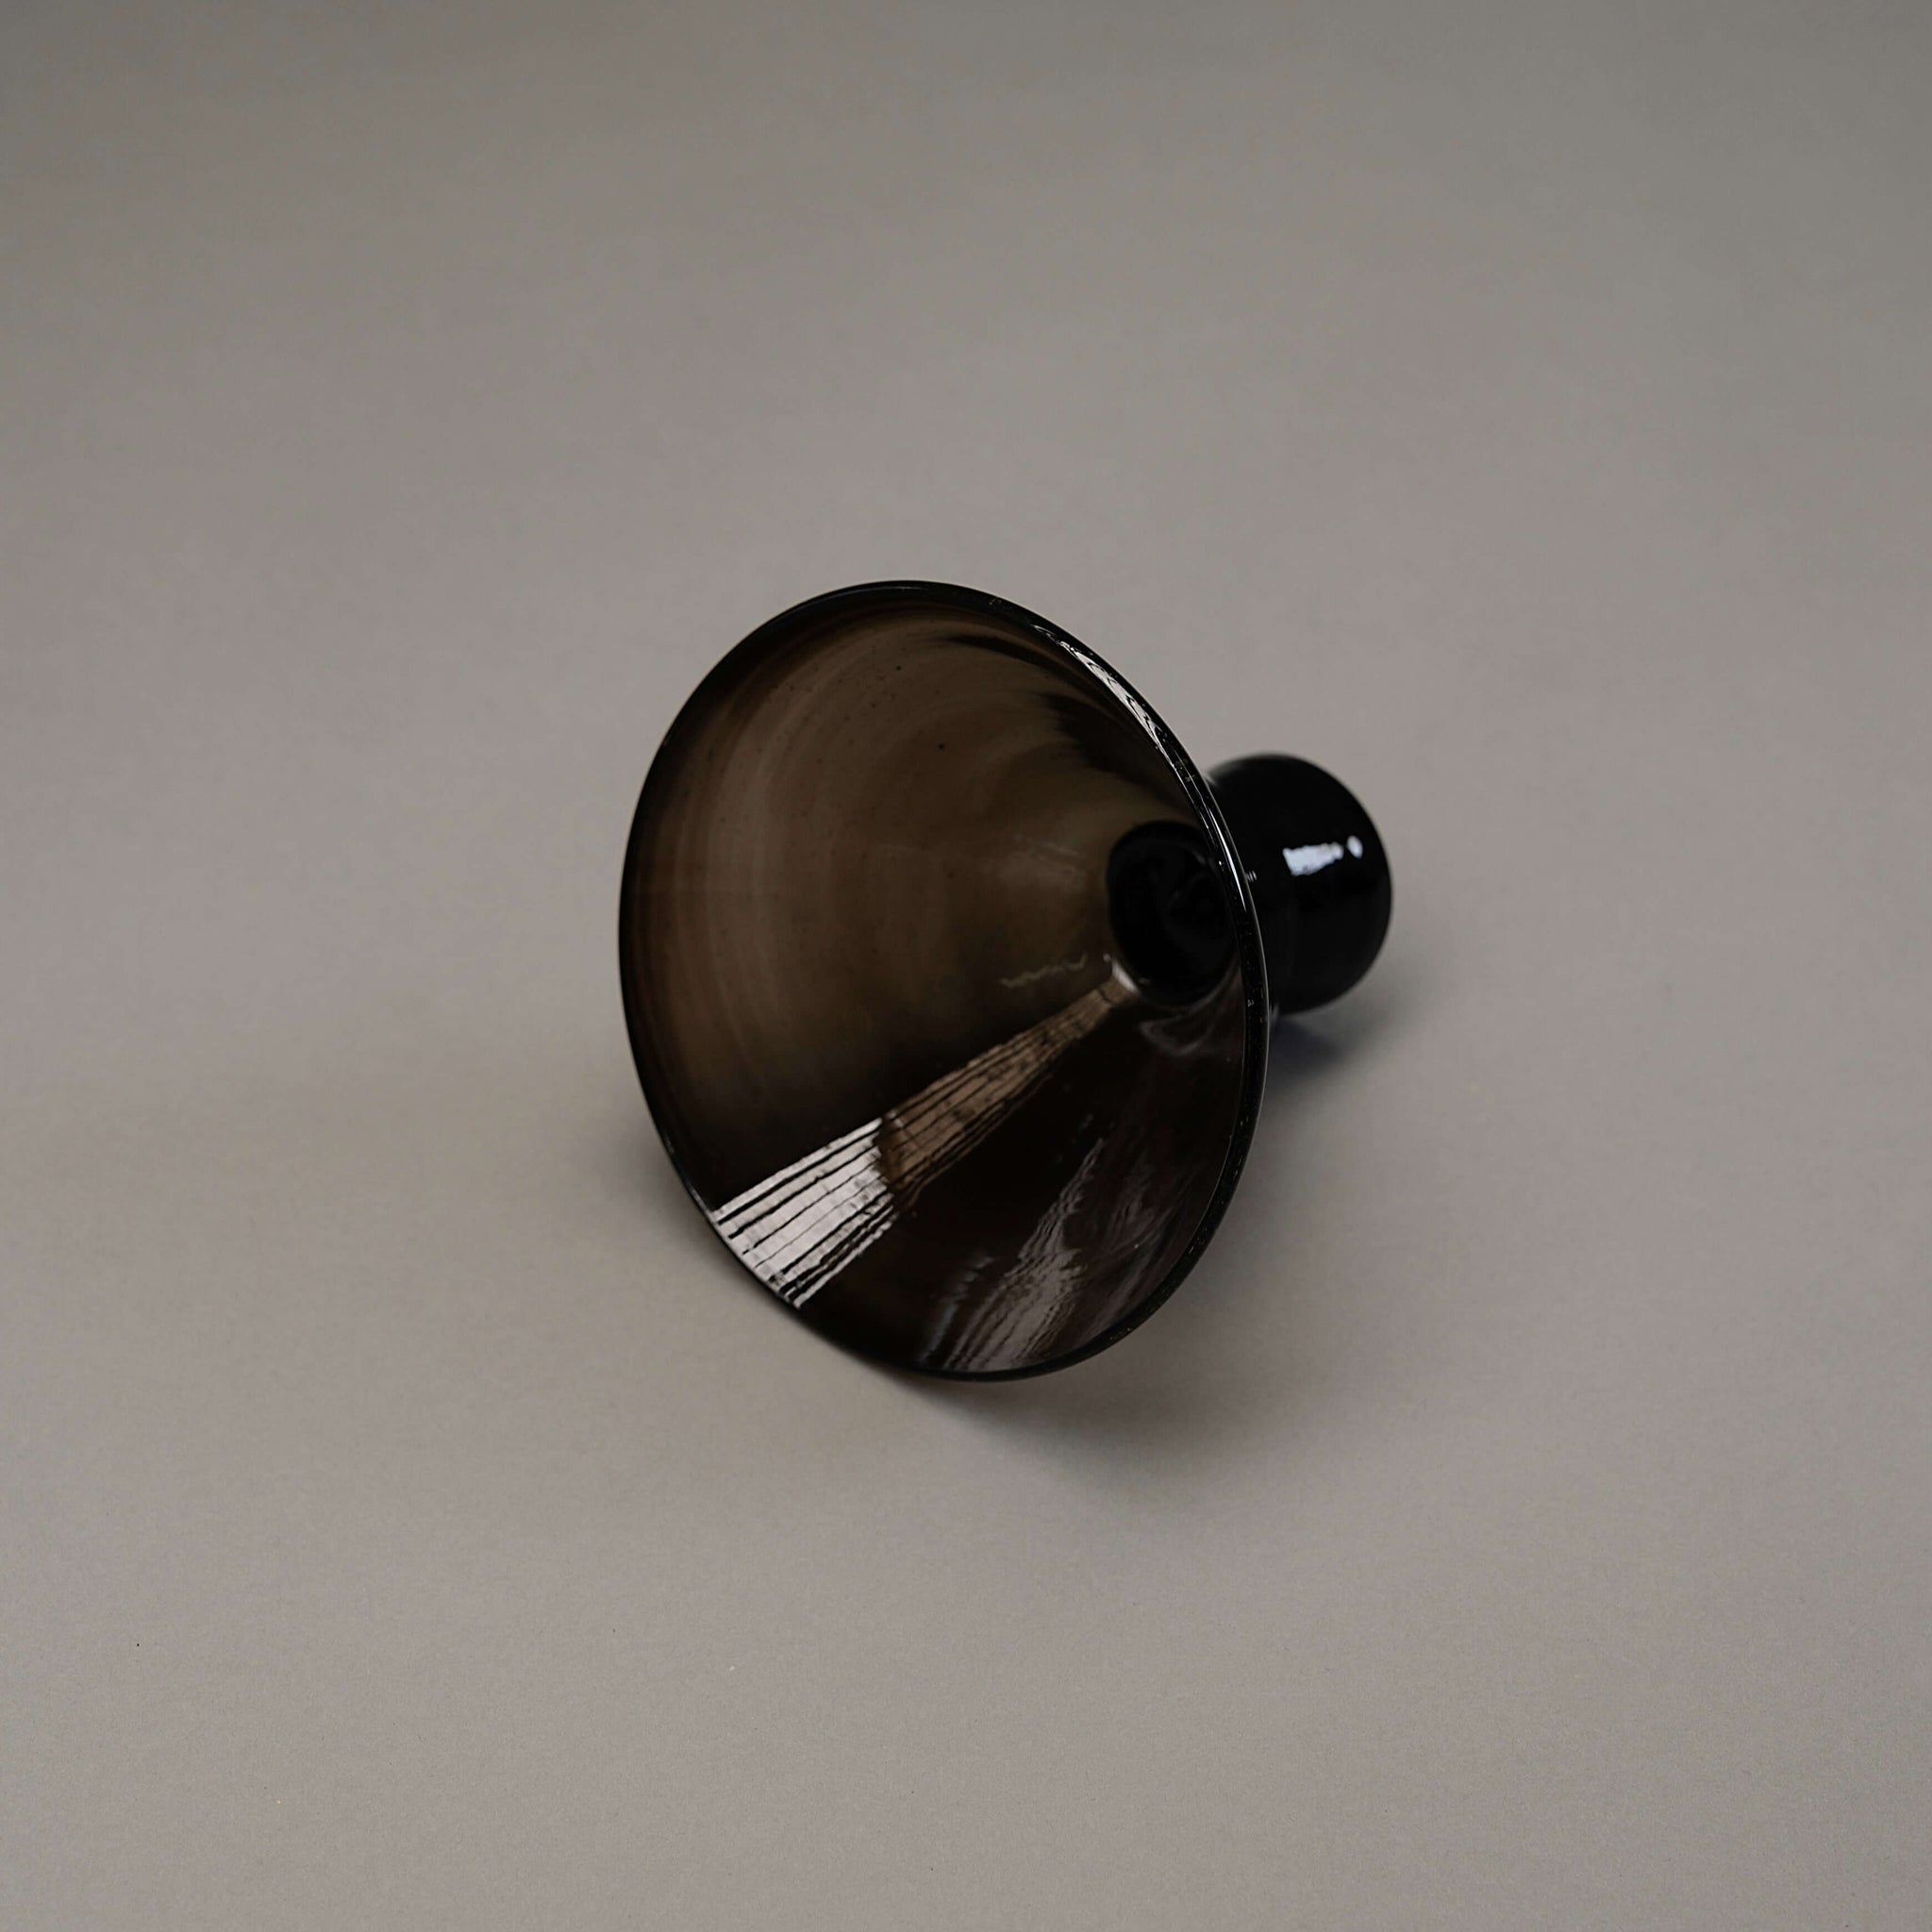 Small footed glass bowl in black.